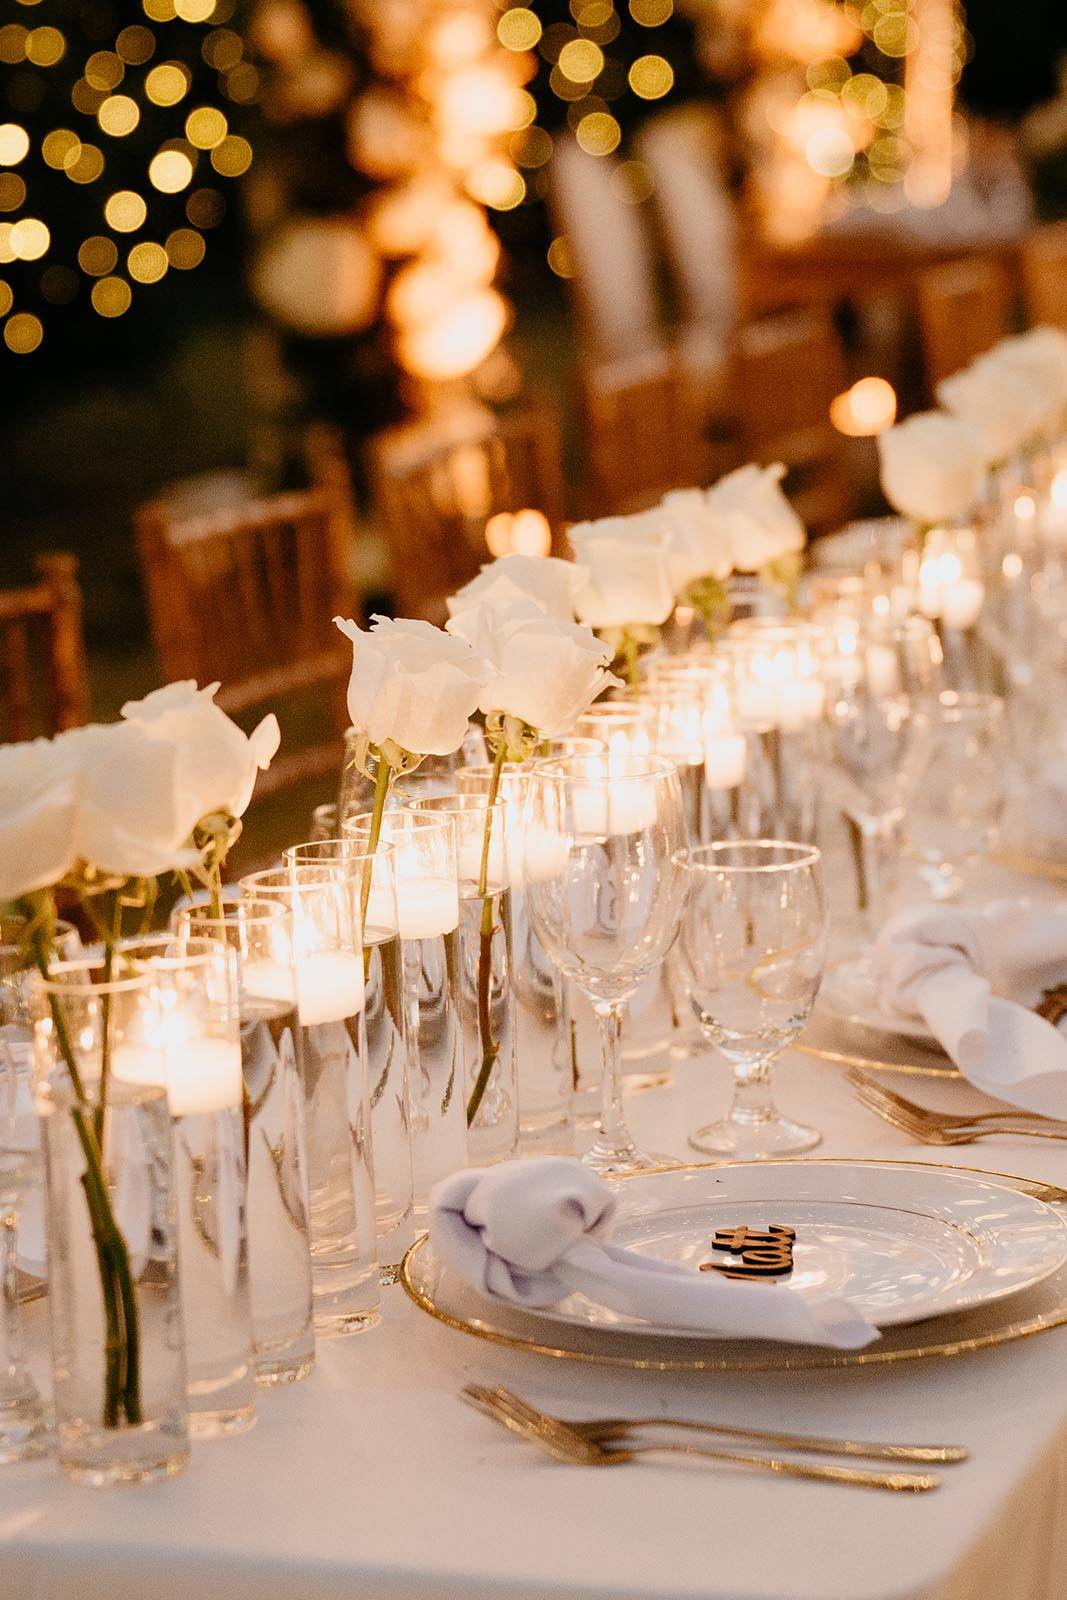 Dinner table with centrepieces